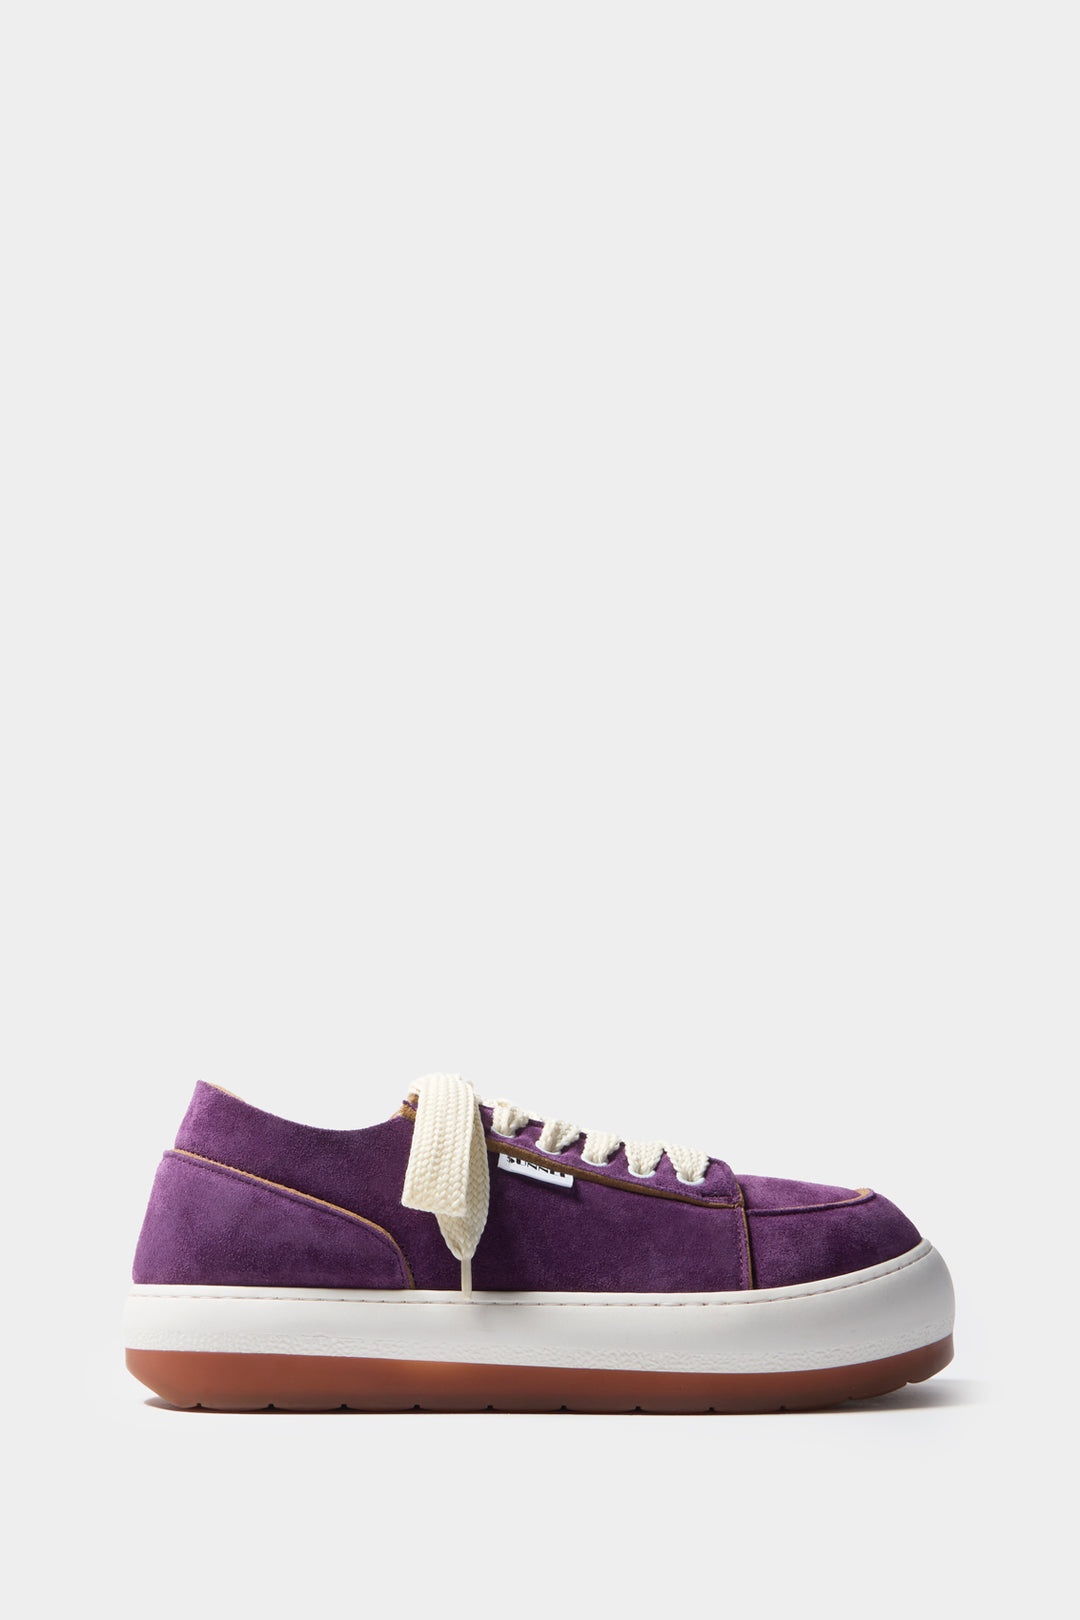 DREAMY SHOES / suede / aubergine - 1